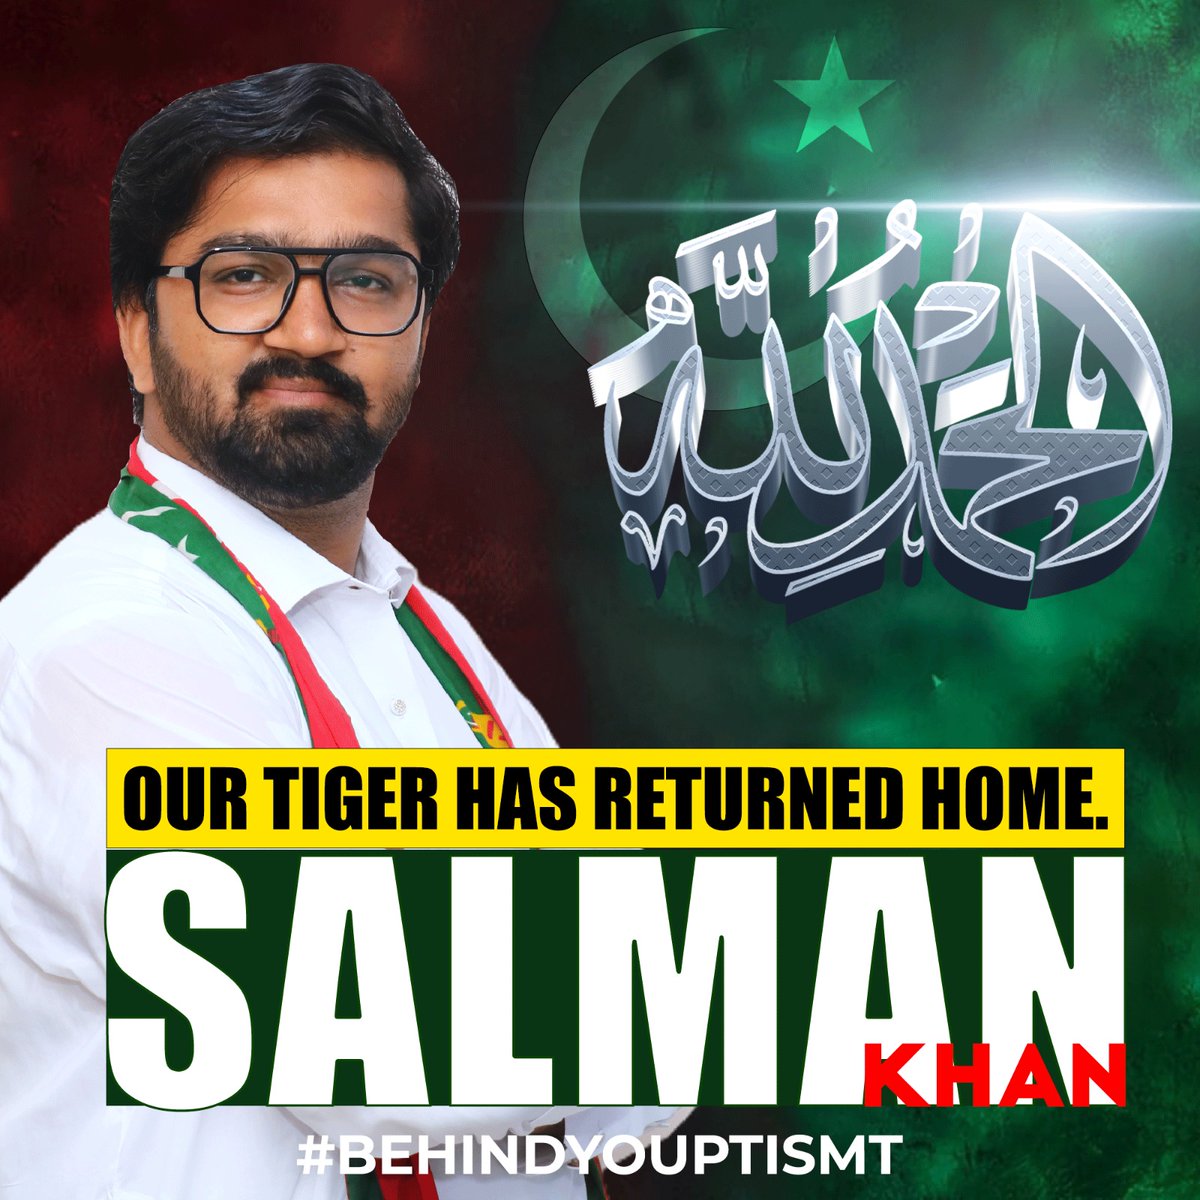 My husband @SahilSalmanPTI is back home thanks to all your prayers...🙏🏽
#BehindYouPTISMT